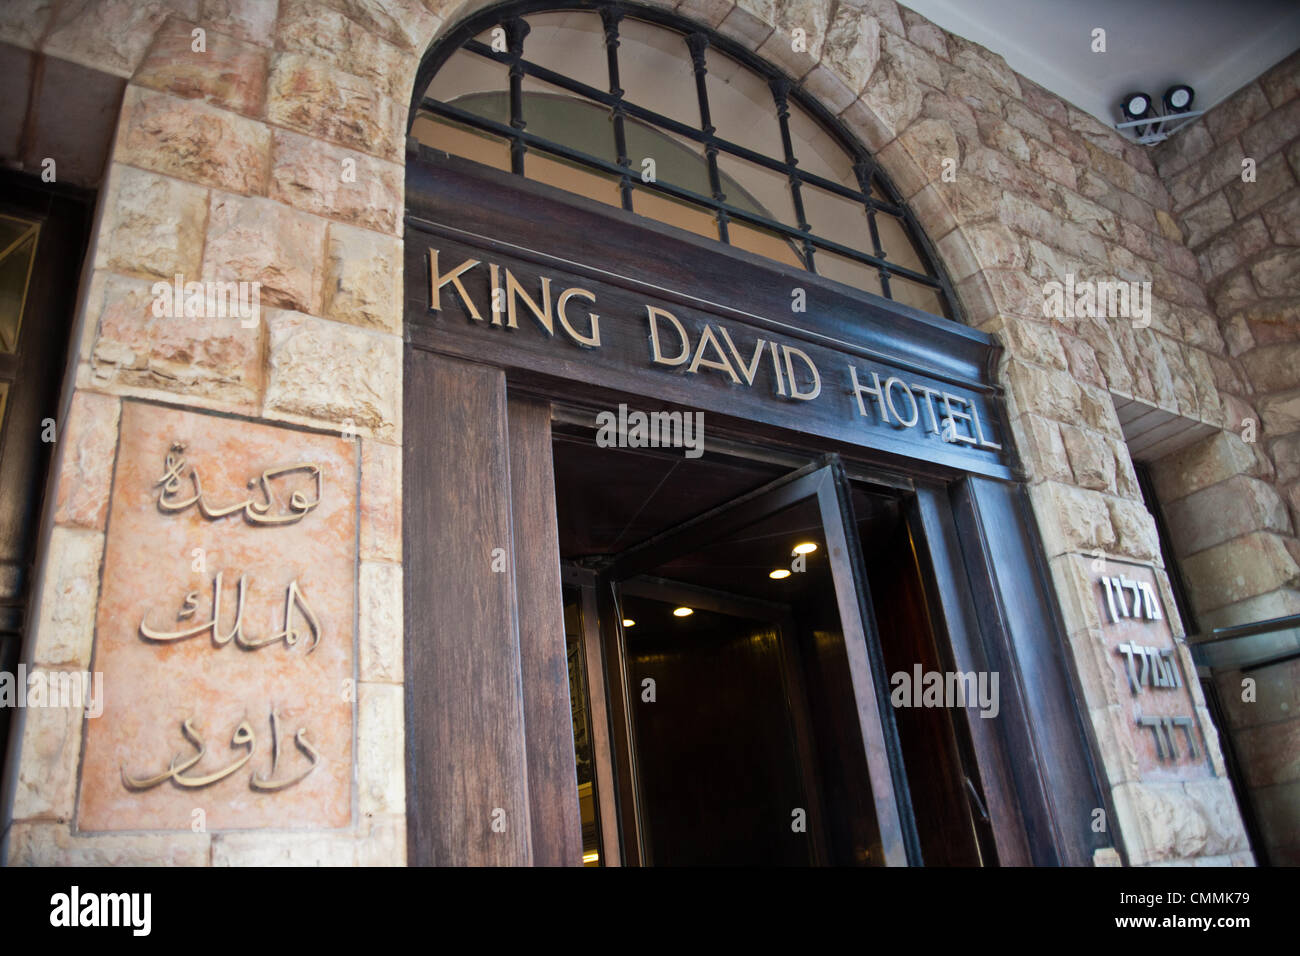 King David Hotel main entrance. The hotel housed the British Mandate Secretariat and army headquarters. On July 22 1946 underground Irgun resistance fighters, planted explosives in the basement, destroying the west wing and killing 92. Jerusalem, Israel. 19-June-2012. Stock Photo